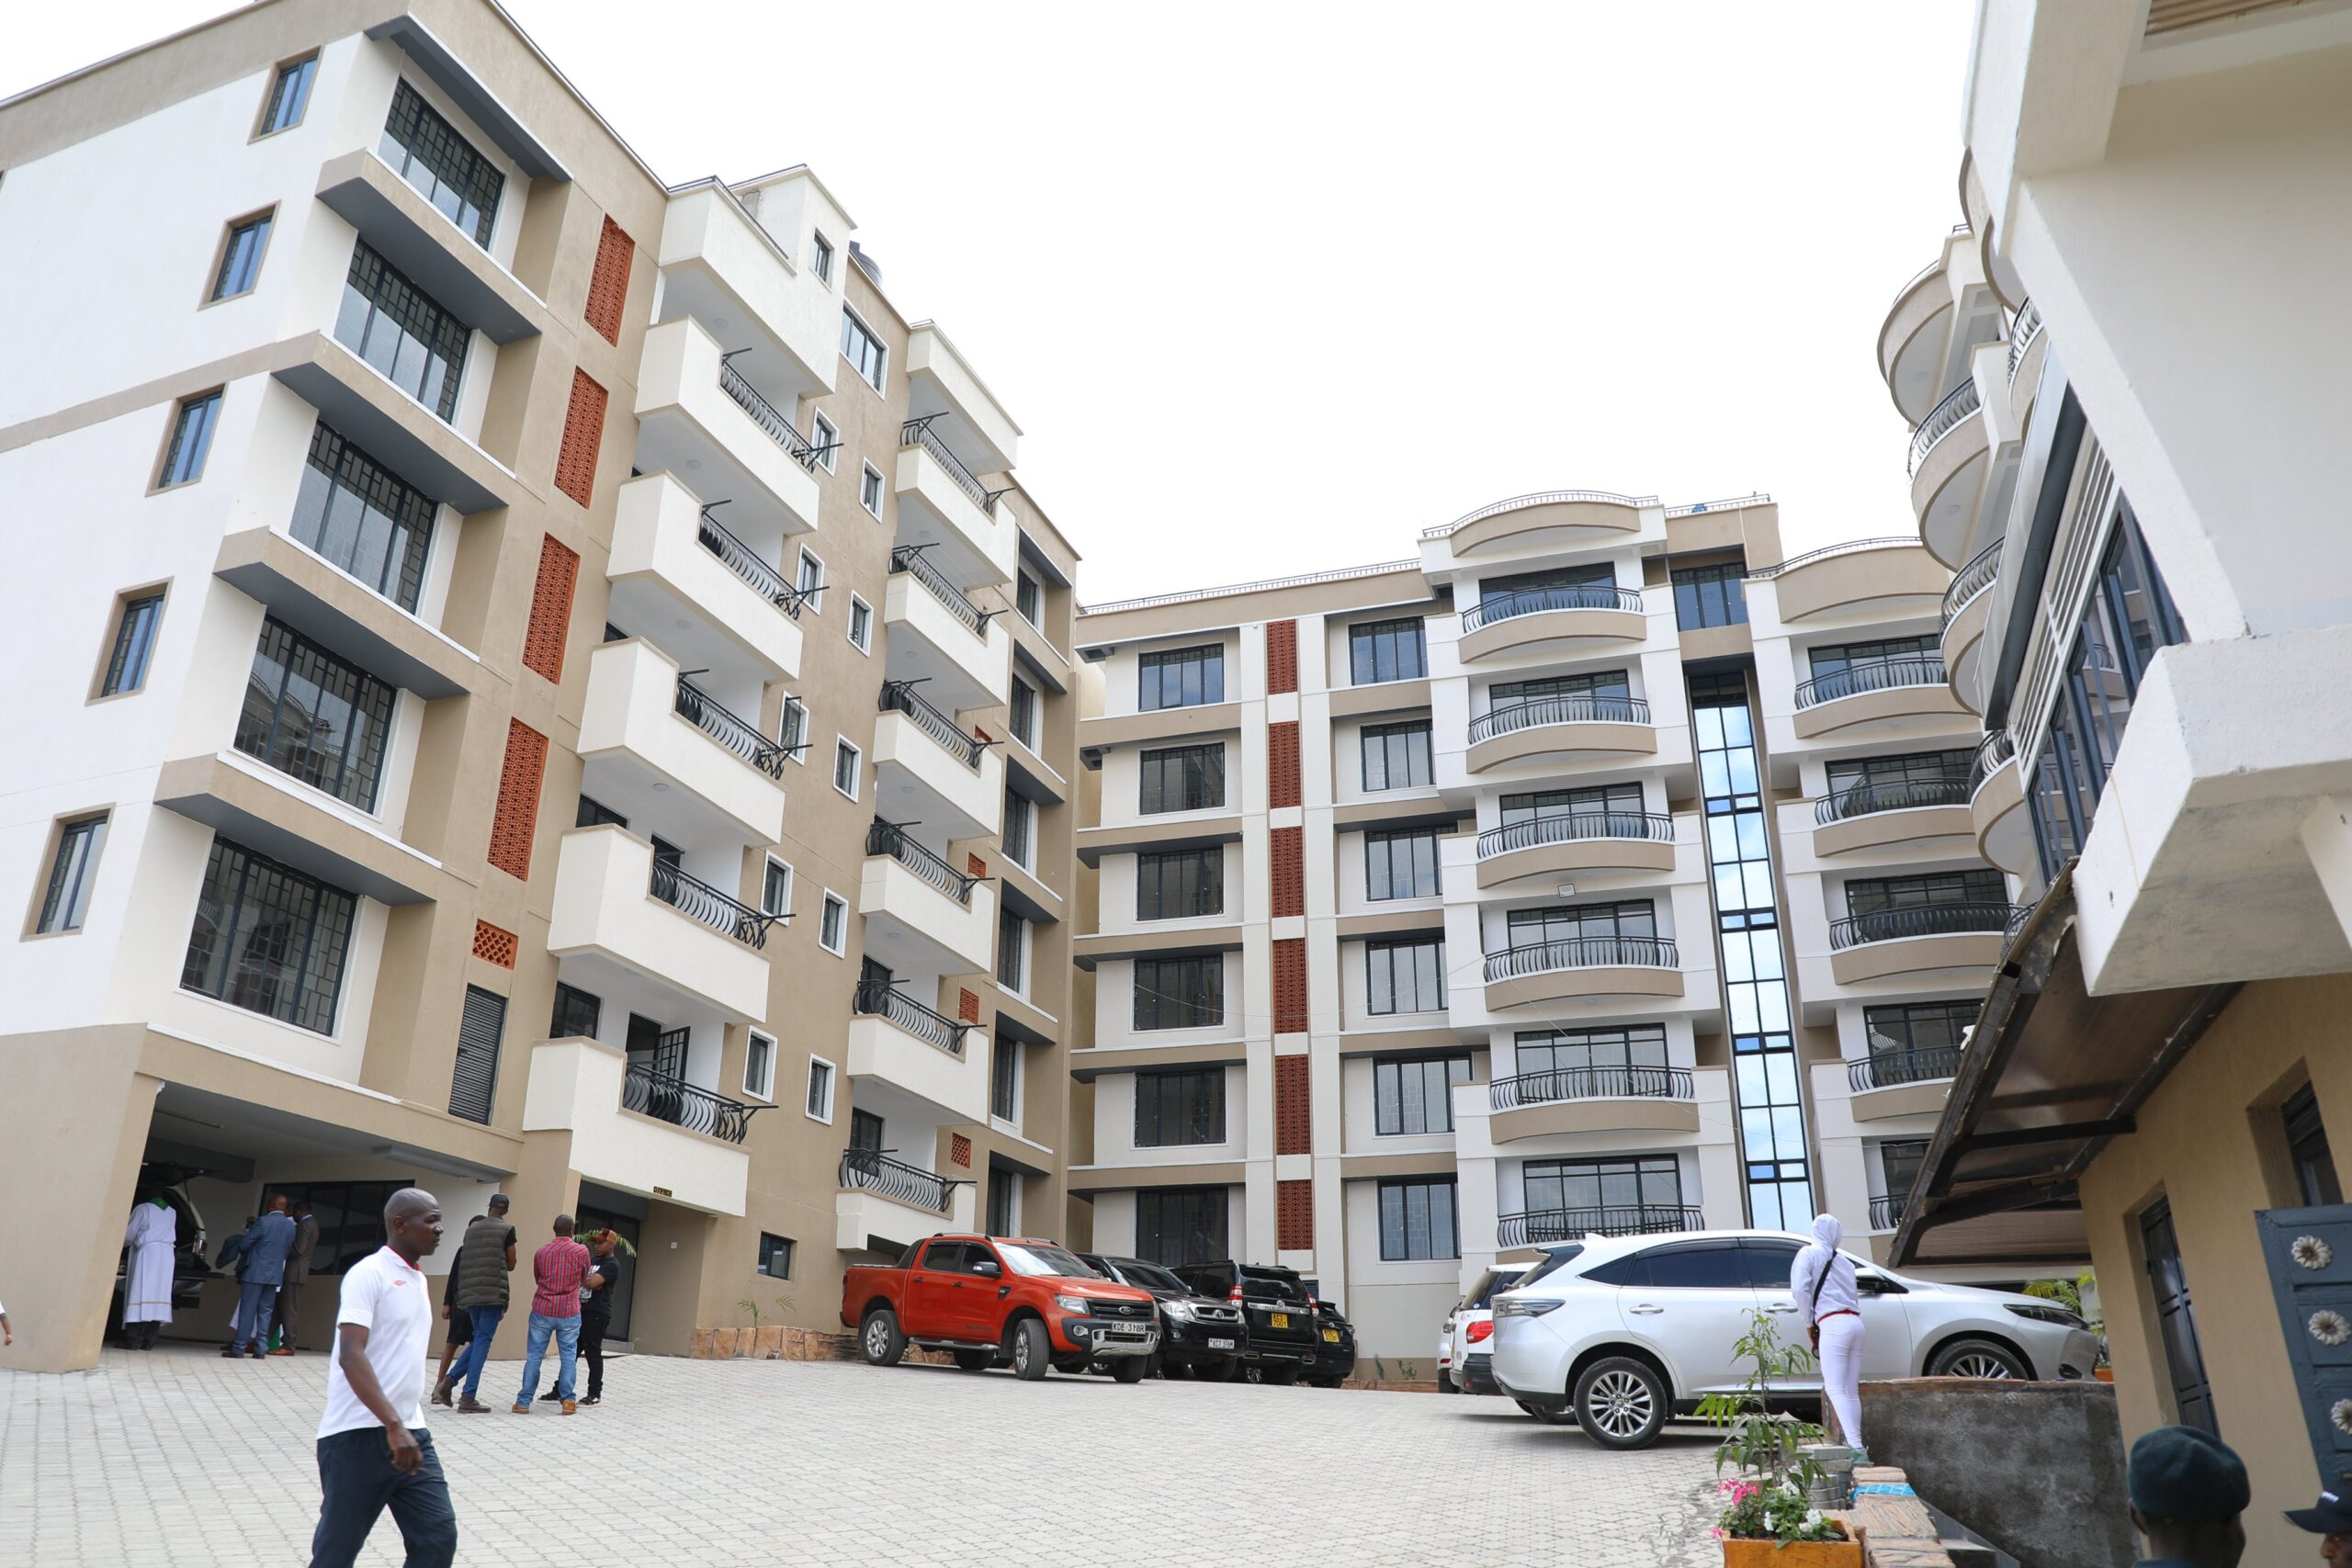 The Housing levy will also improve infrastructure: CS Njeru